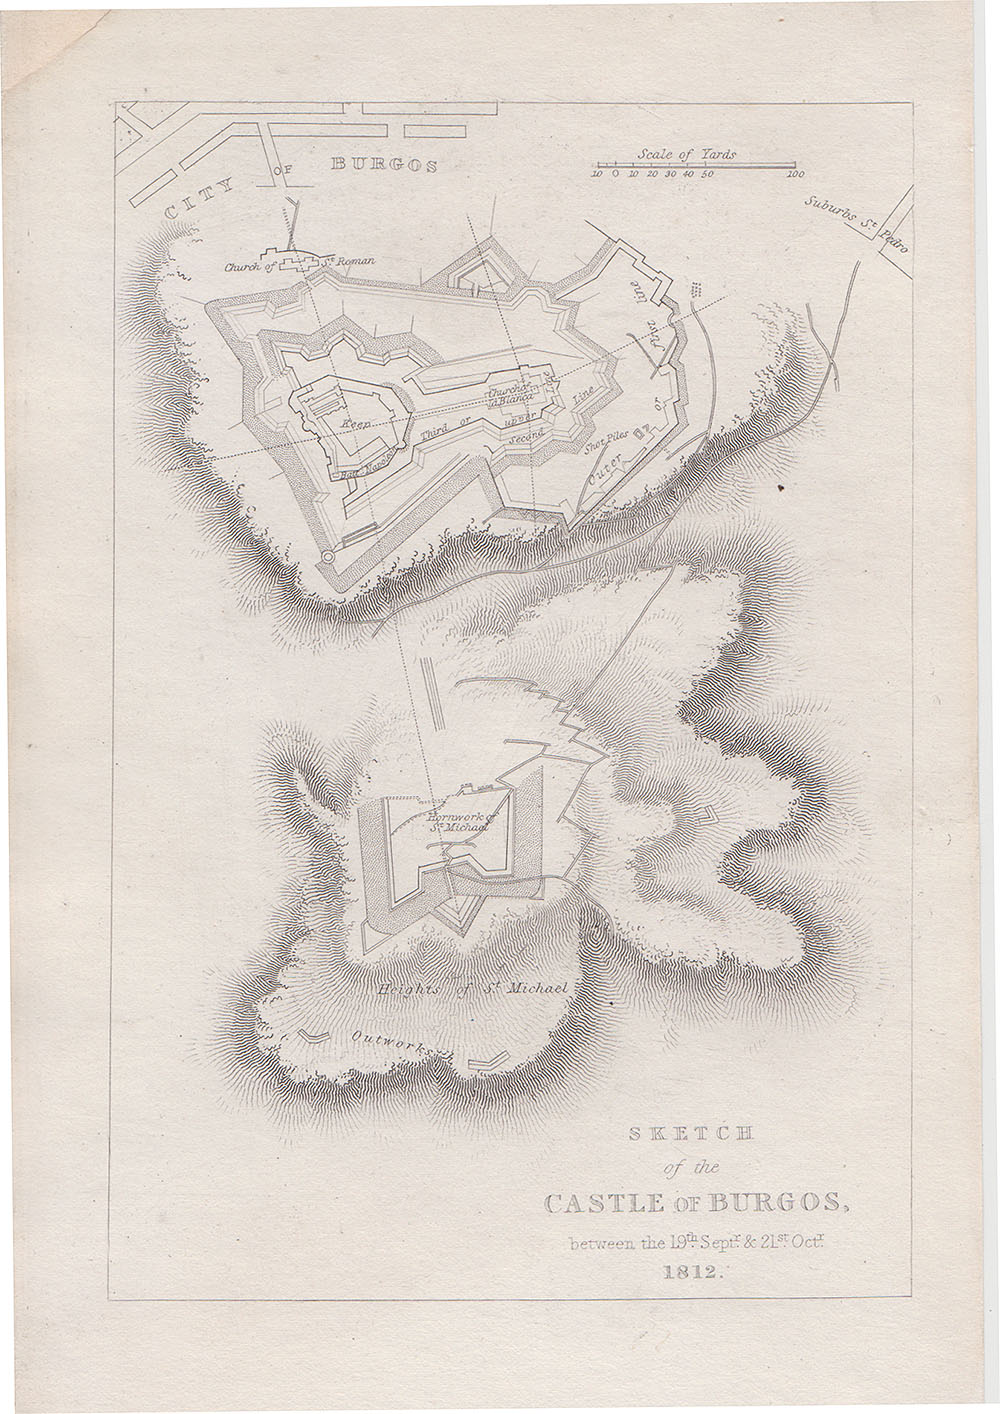 Sketch of the Castle of Burgos between the 19th Sept & 21st October 1812